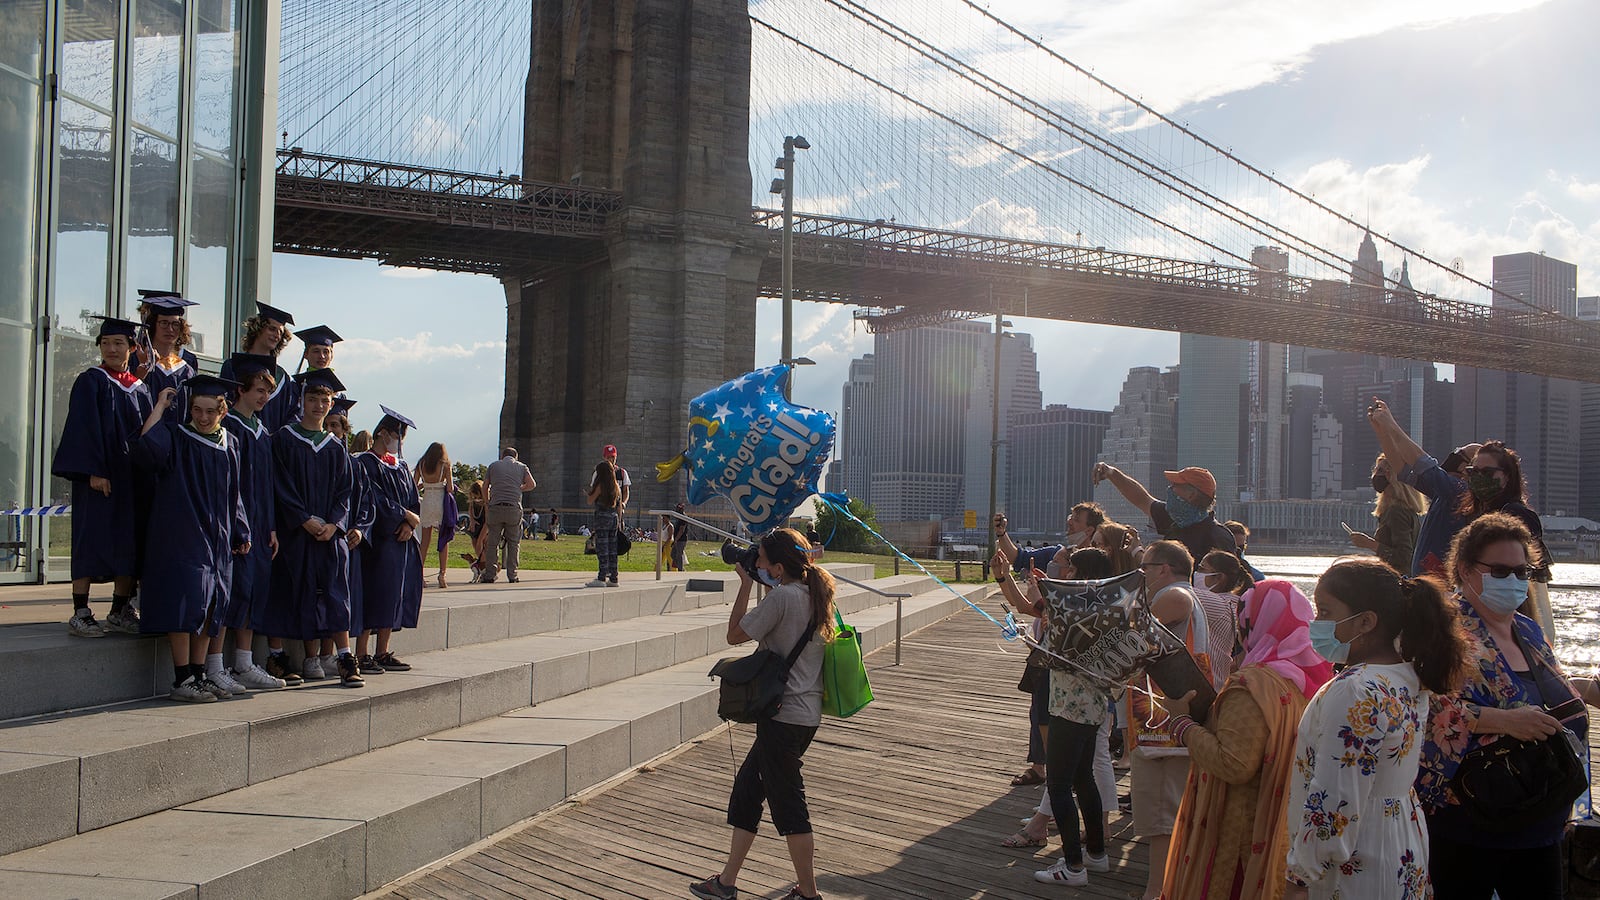 Students stand in graduation robes and caps next to the river and Brooklyn Bridge as a photographer takes photos